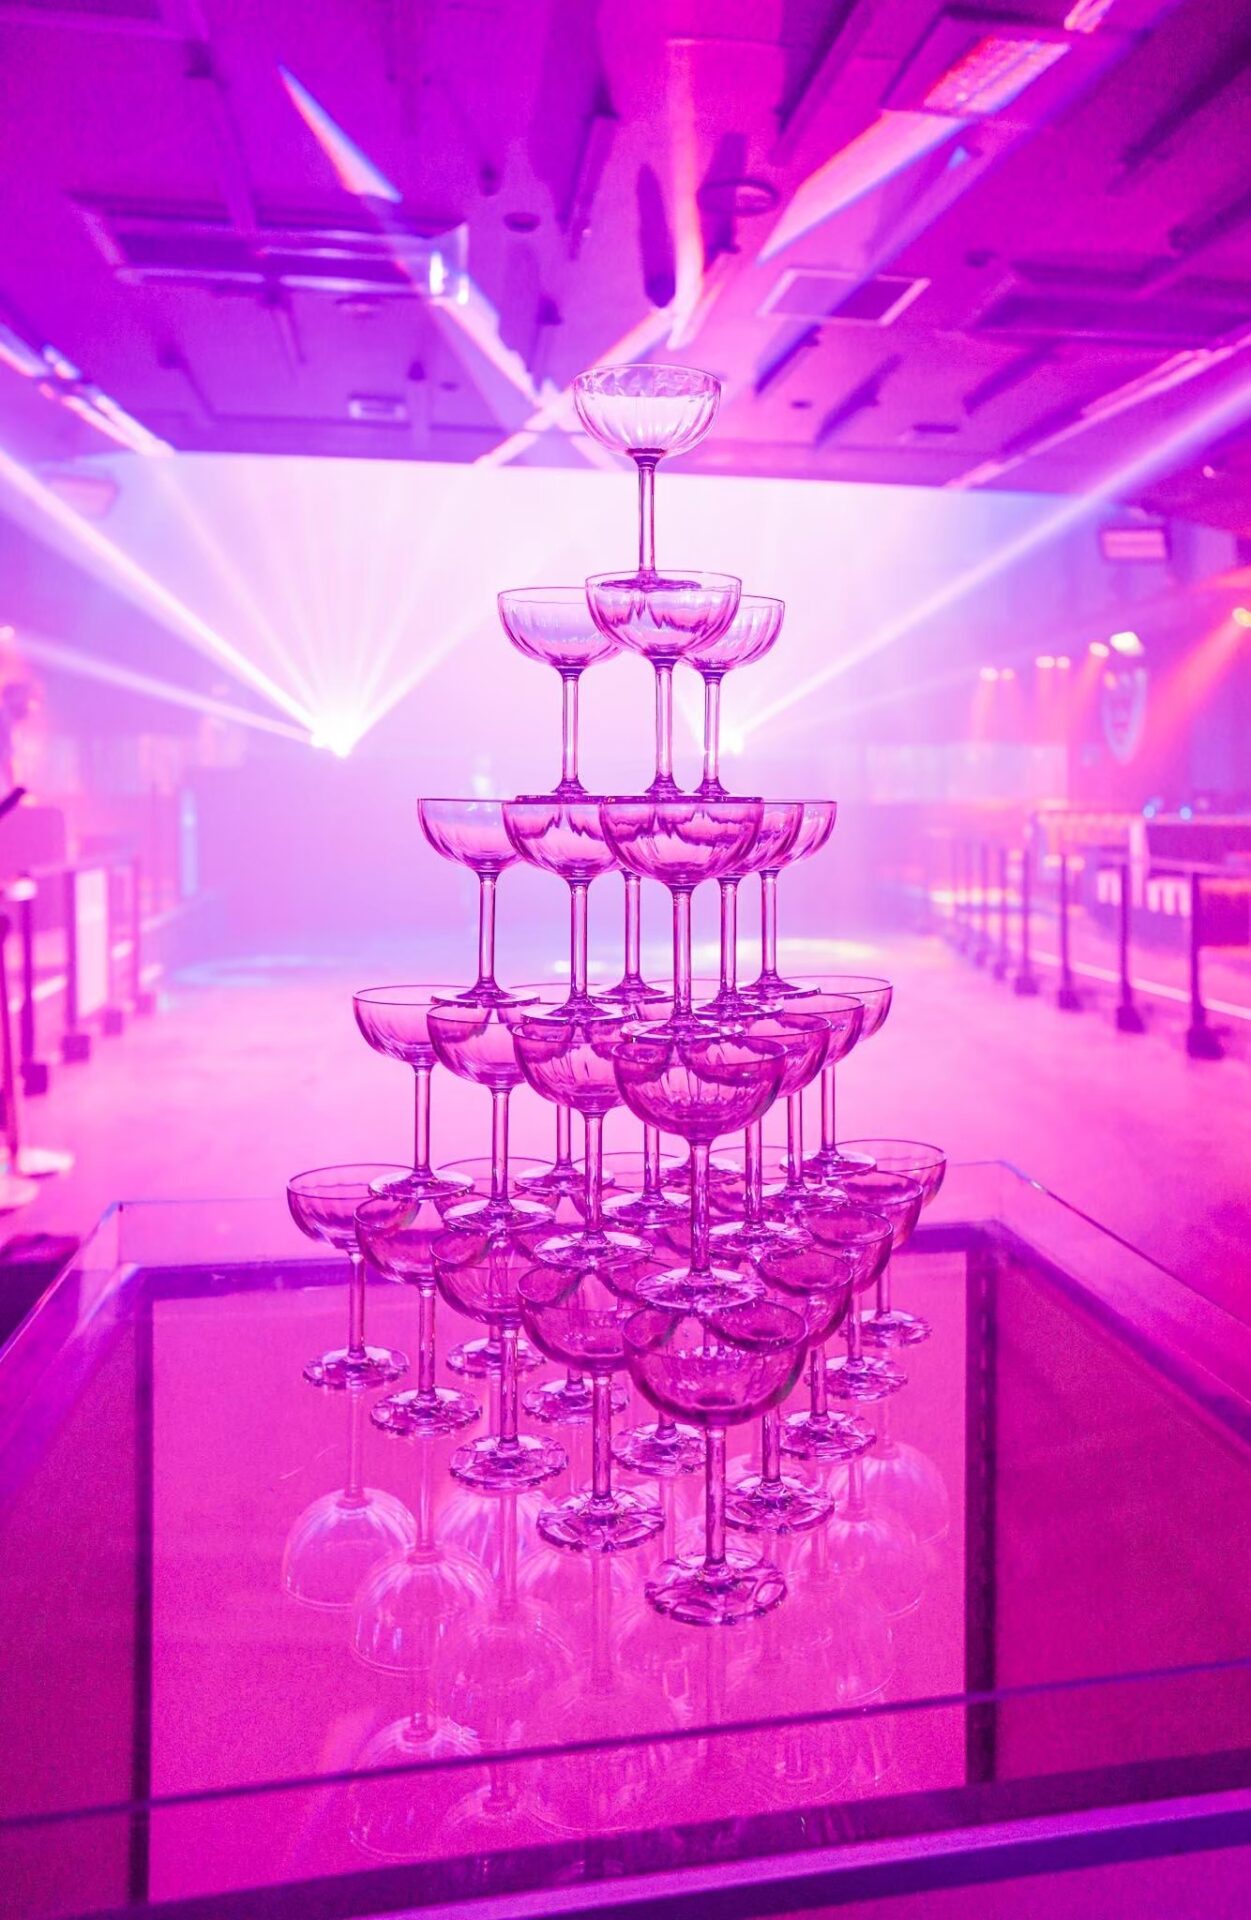 Champagne tower shining in the light at a live concert venue